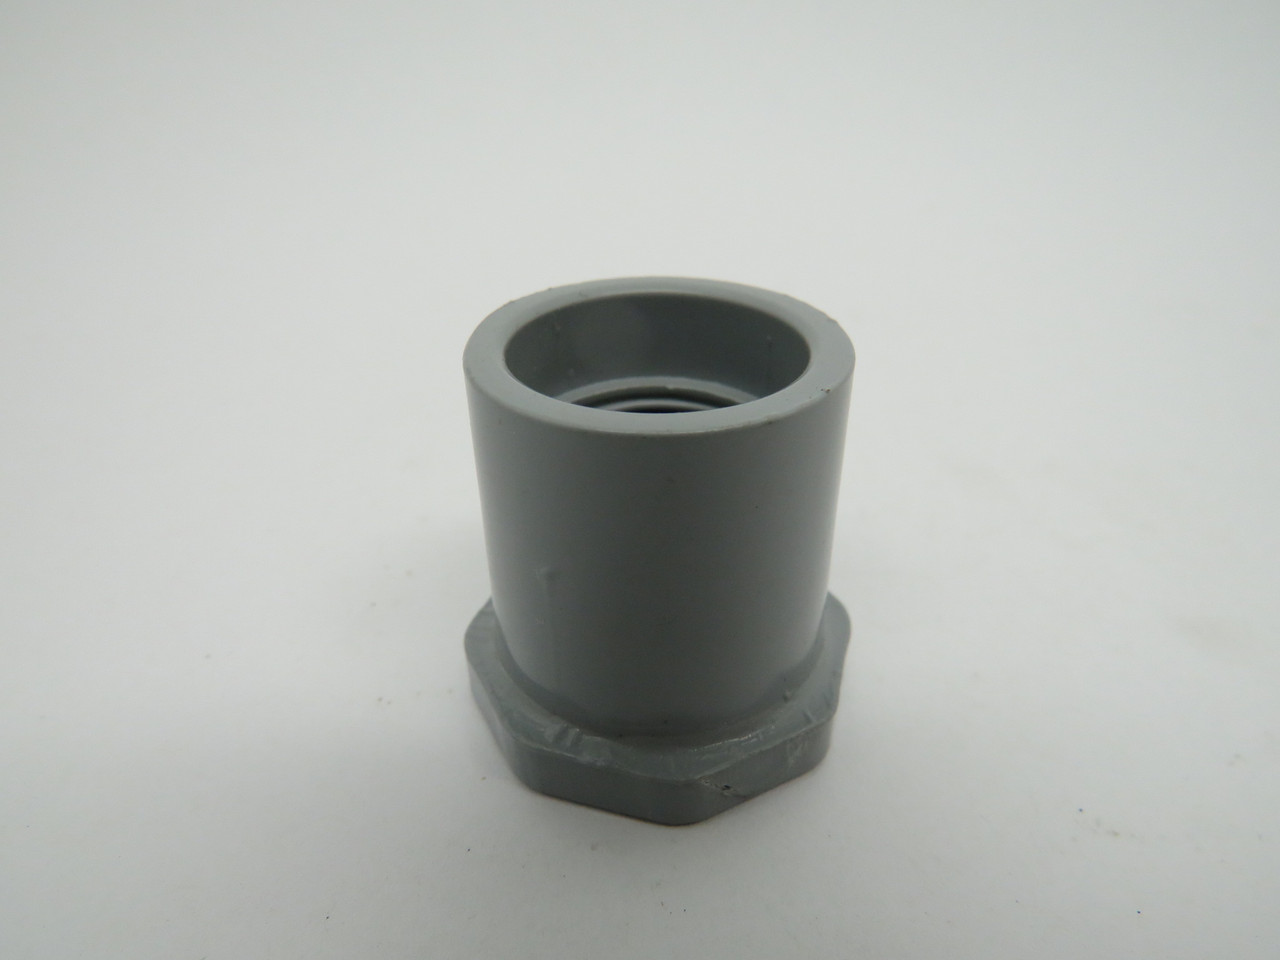 Canlet 2049-101 Threaded Reducer 3/4x1/2 ! NOP !